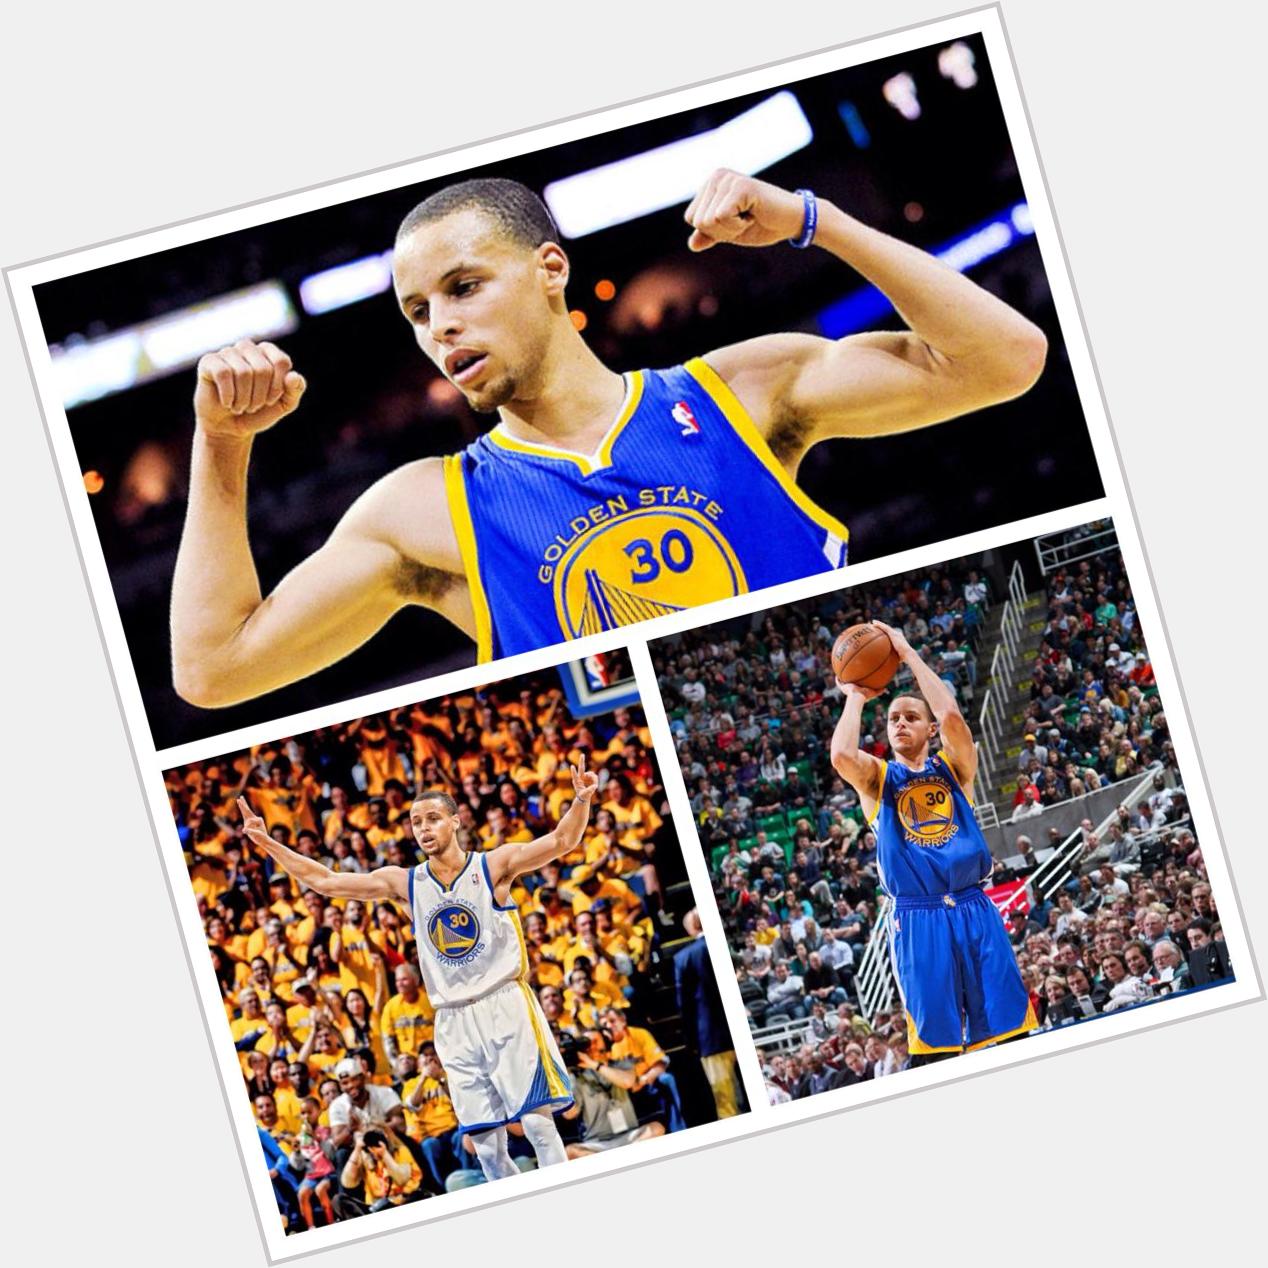  Happy Birthday Stephen Curry!!! I hope you have an AMAZING day!!! 